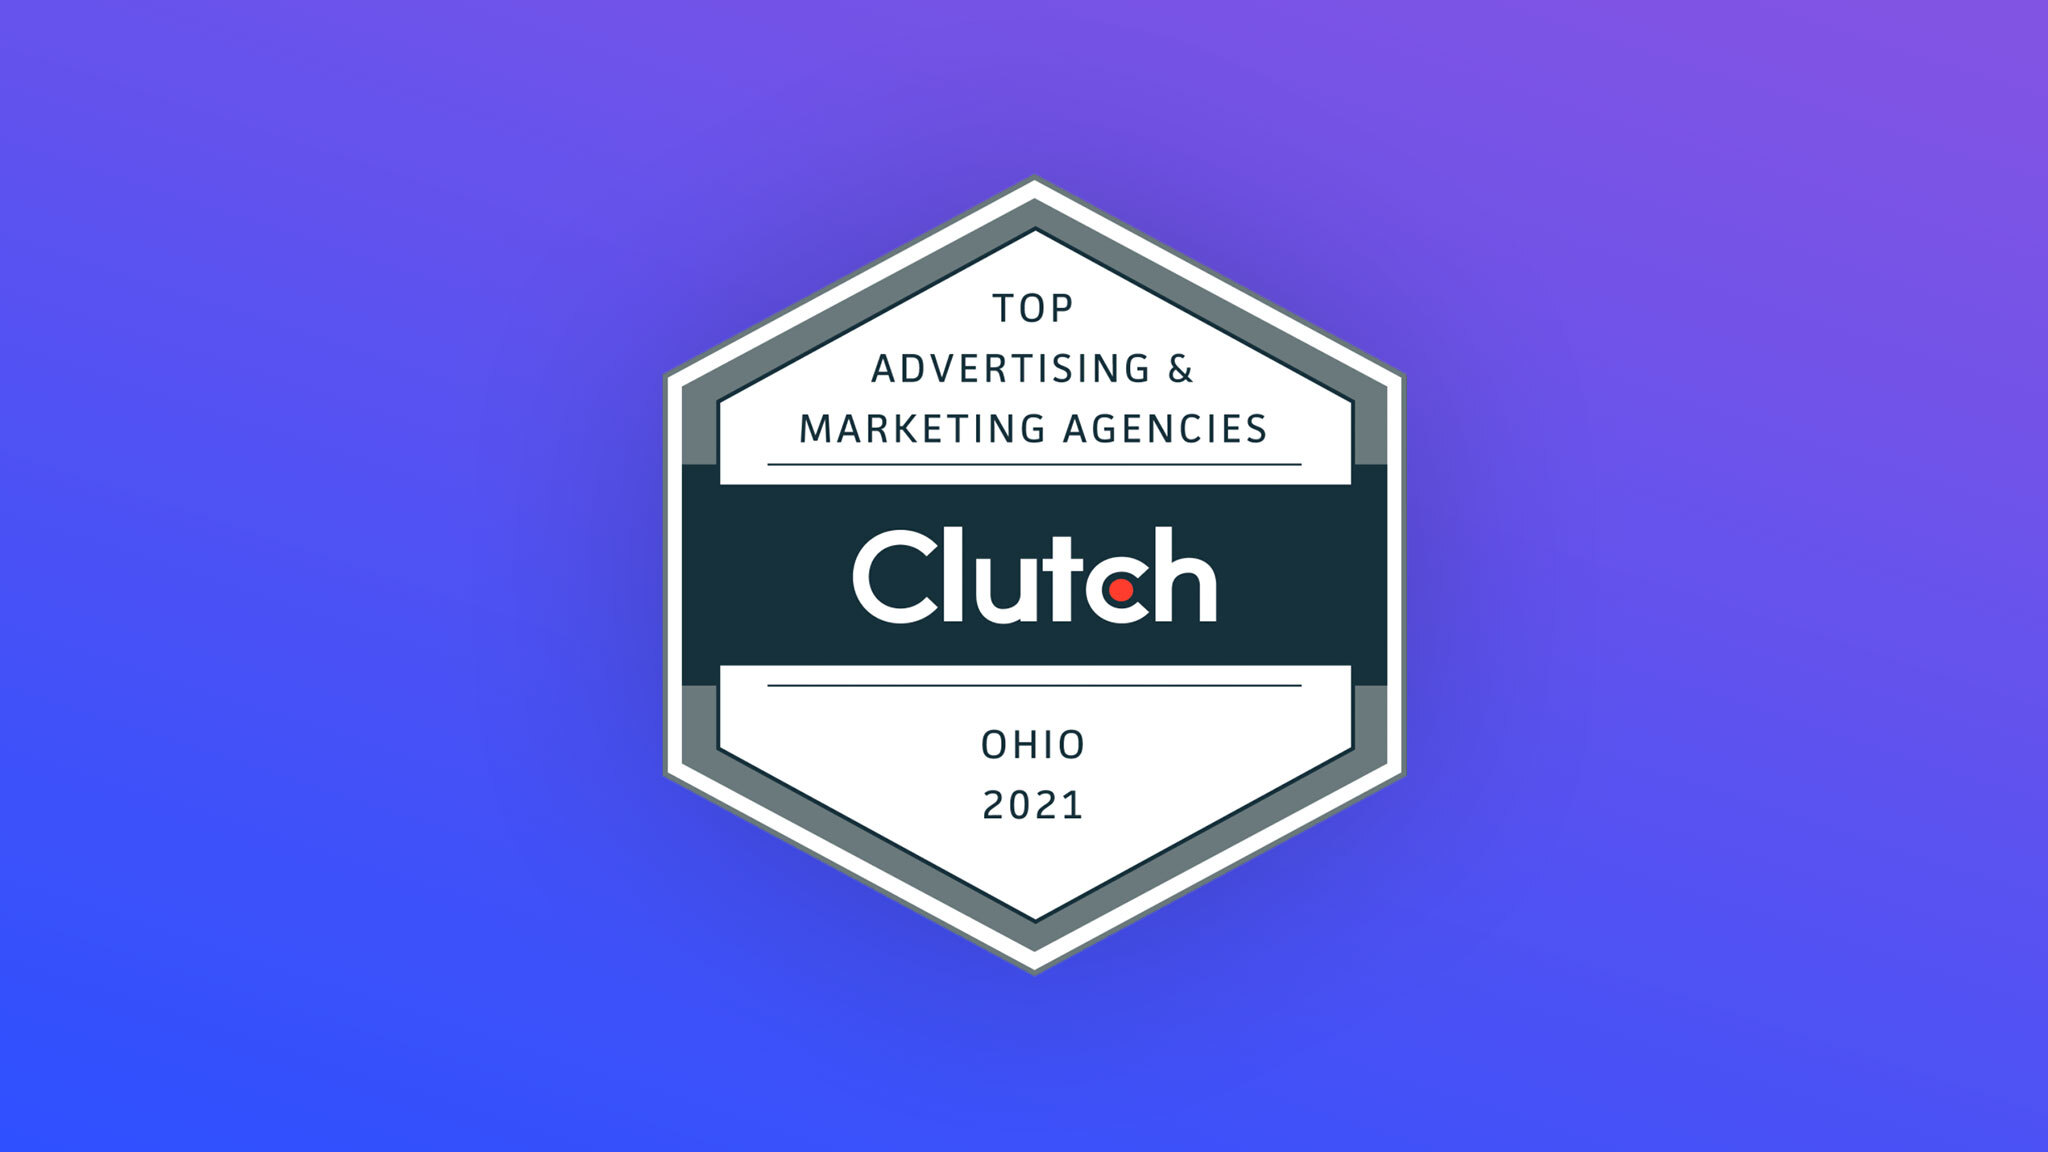 oppgen marketing clutch top ppc agency ohio 2021 featured image